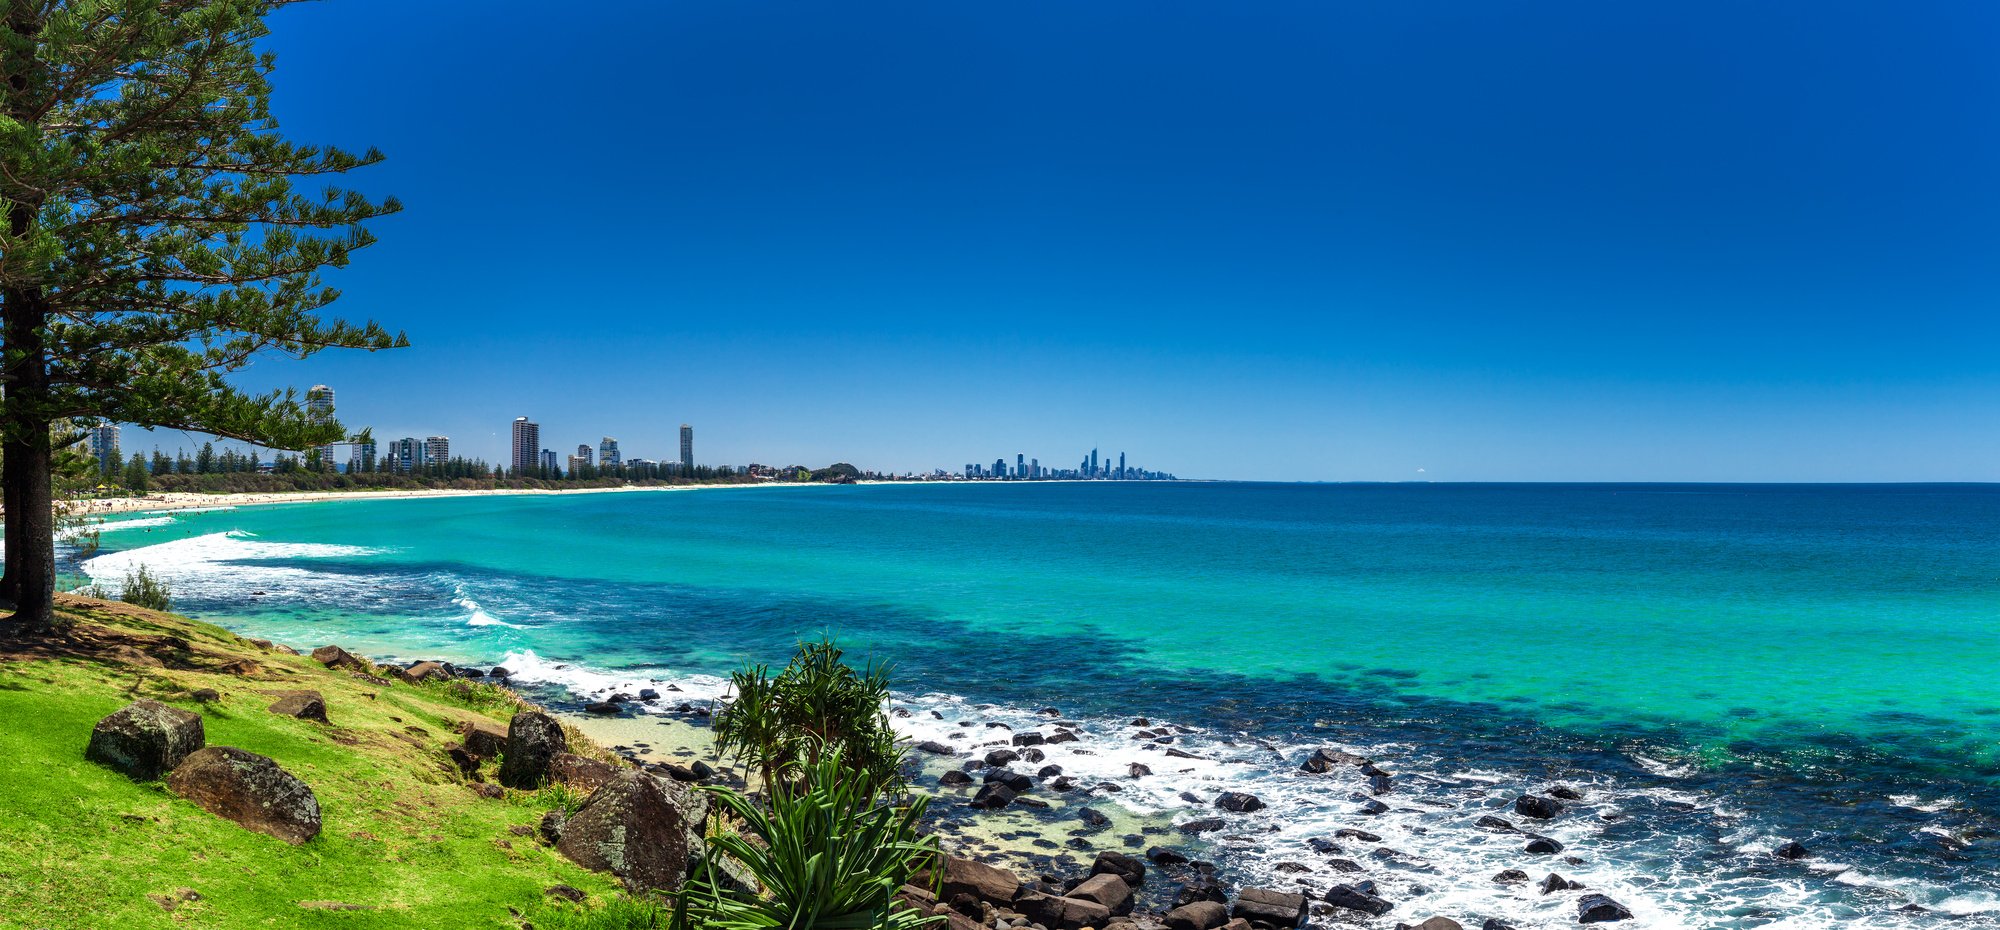 5 Inspiring Travel Quotes for Your Next Visit to Gold Coast, AU